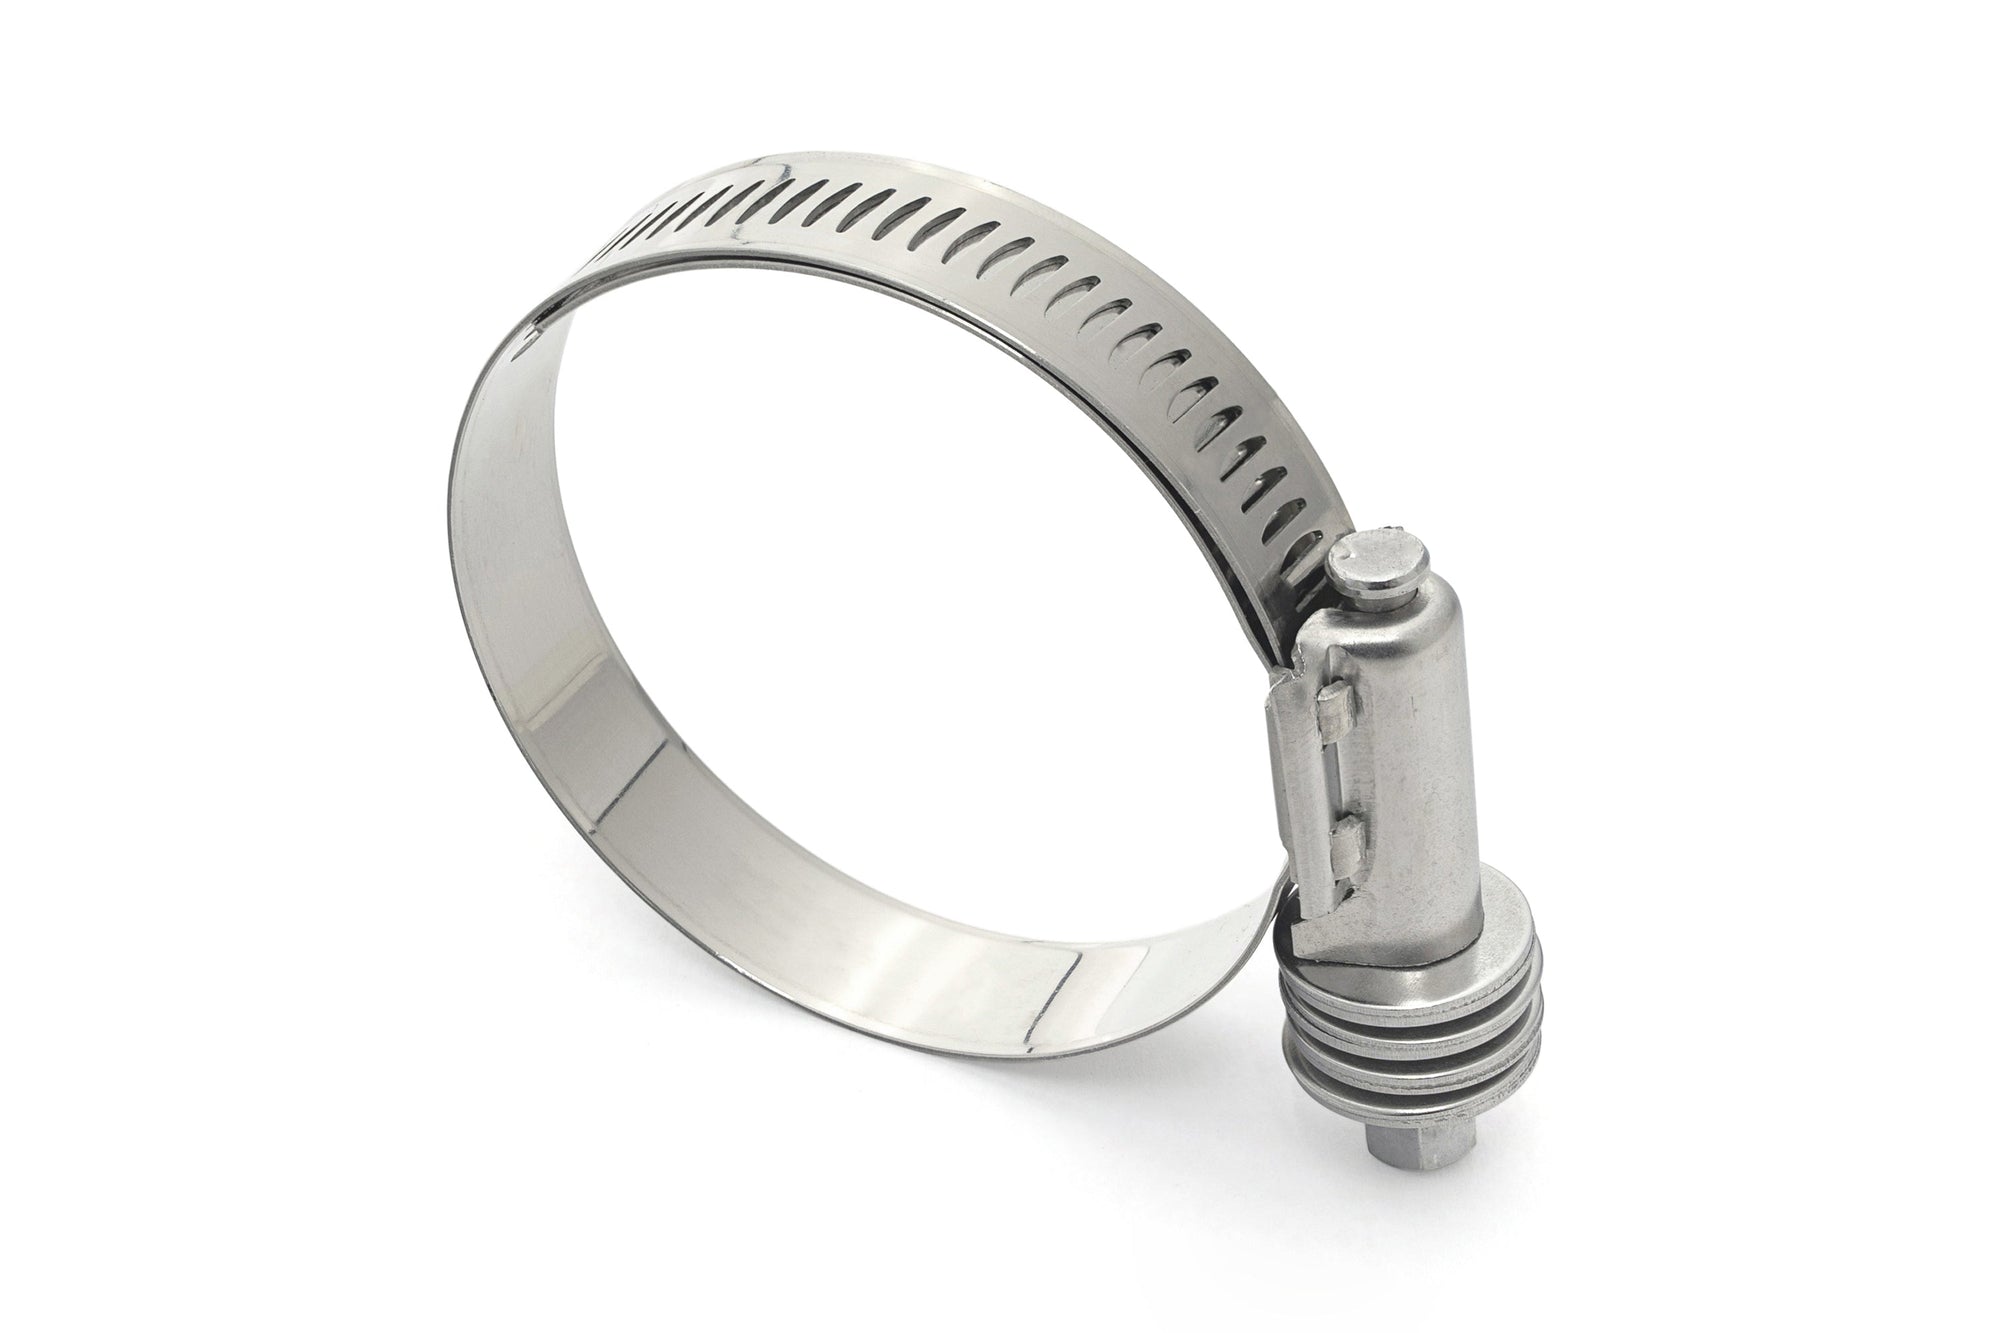 HPS Stainless Steel Constant Torque Hose Clamp CTF-325 2-5/16 3-1/4 inch 59mm - 83mm Size # 44